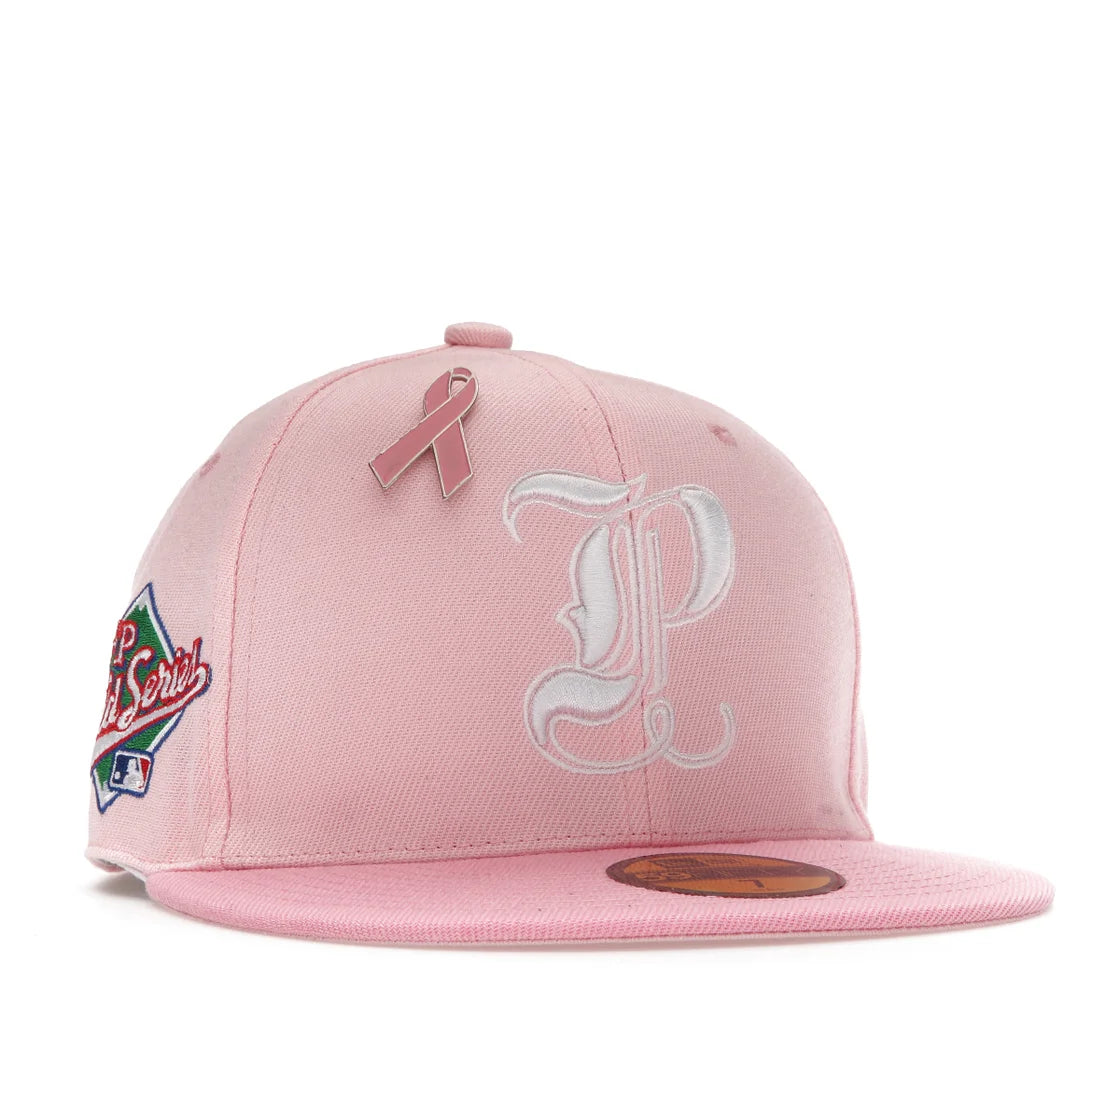 TFP World Series Fitted Cap (Pink)